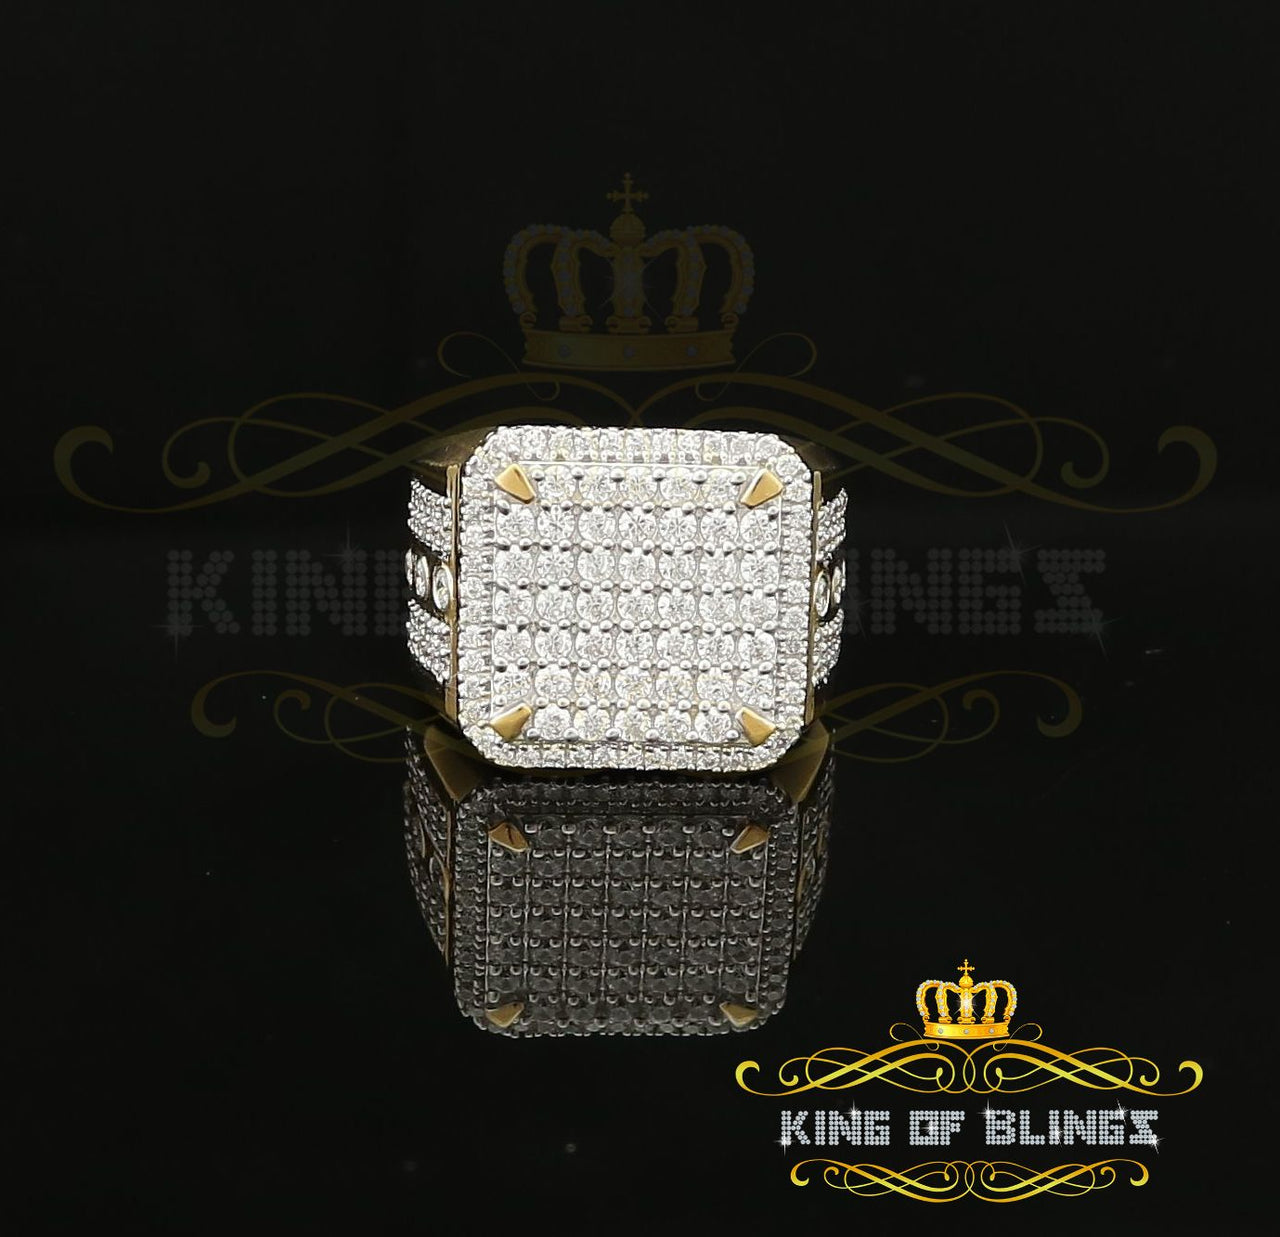 King Of Bling's Big Look yellow Sterling Silver 4.90ct Cubic Zirconia Square Men's Ring SZ 9 KING OF BLINGS